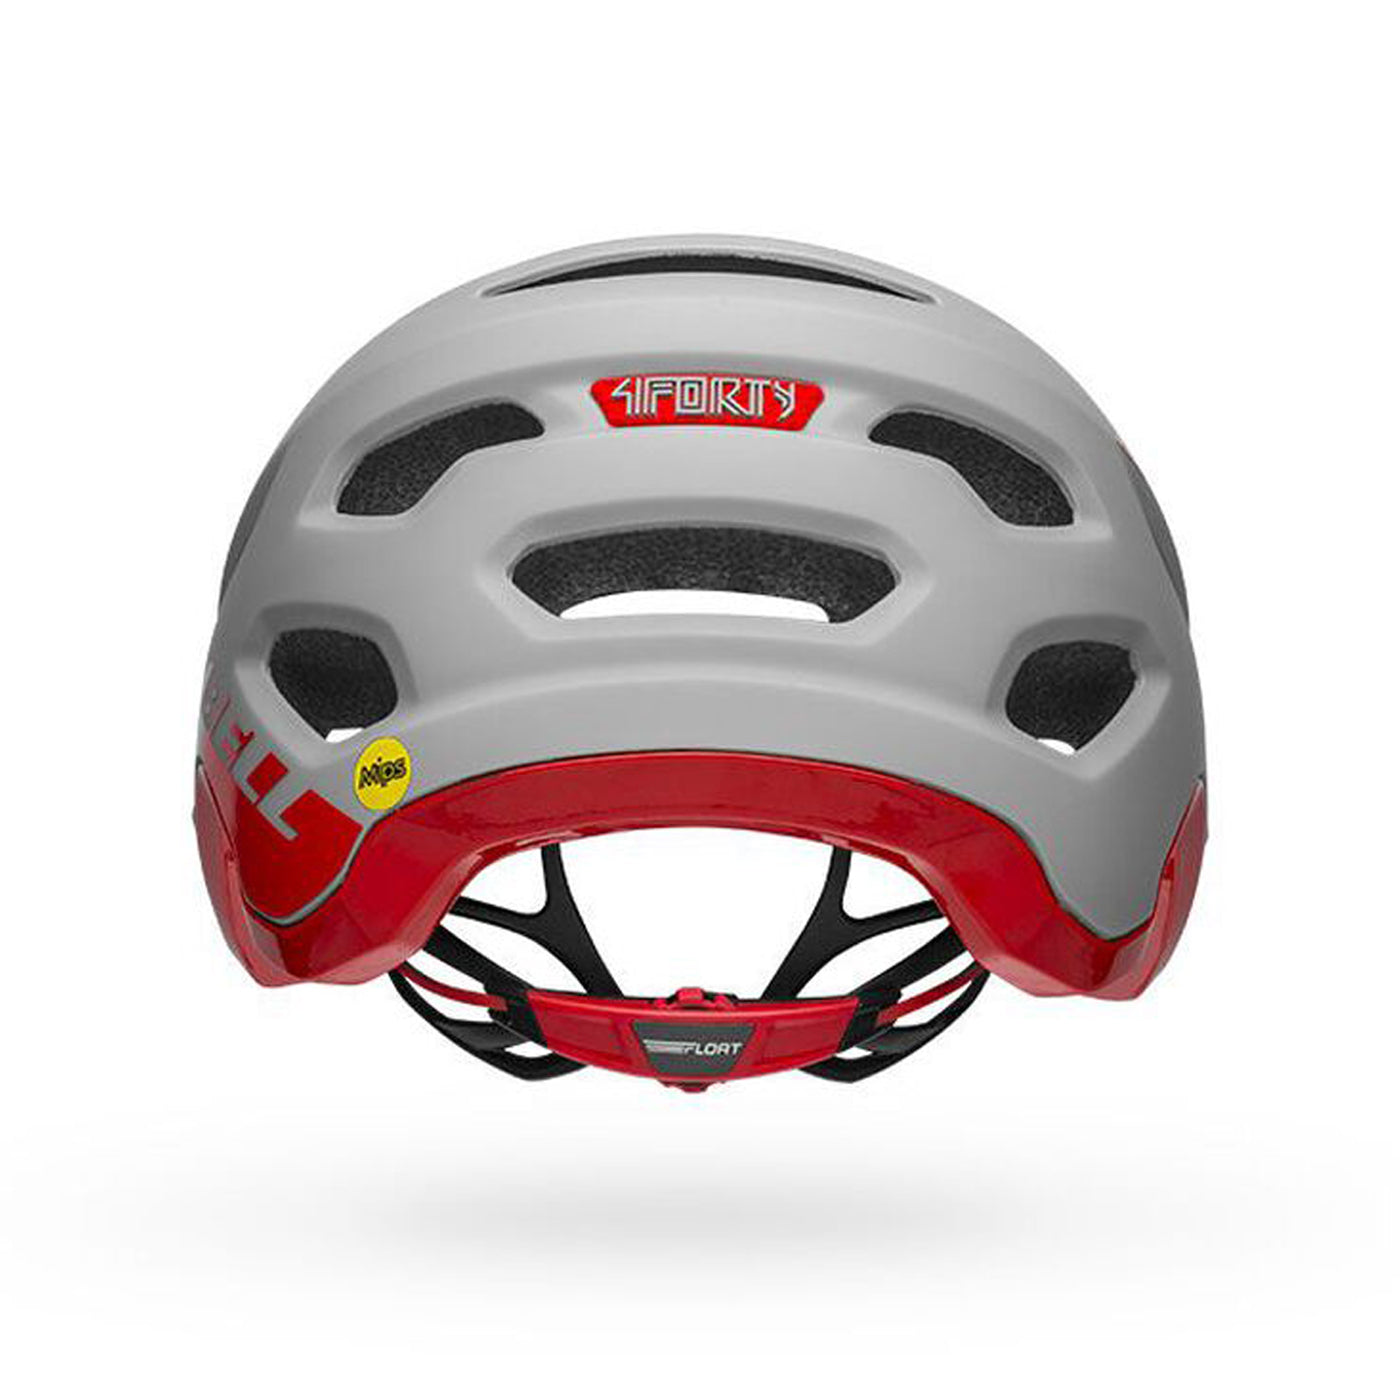 Casco Ciclismo Bell 4Forty Gris